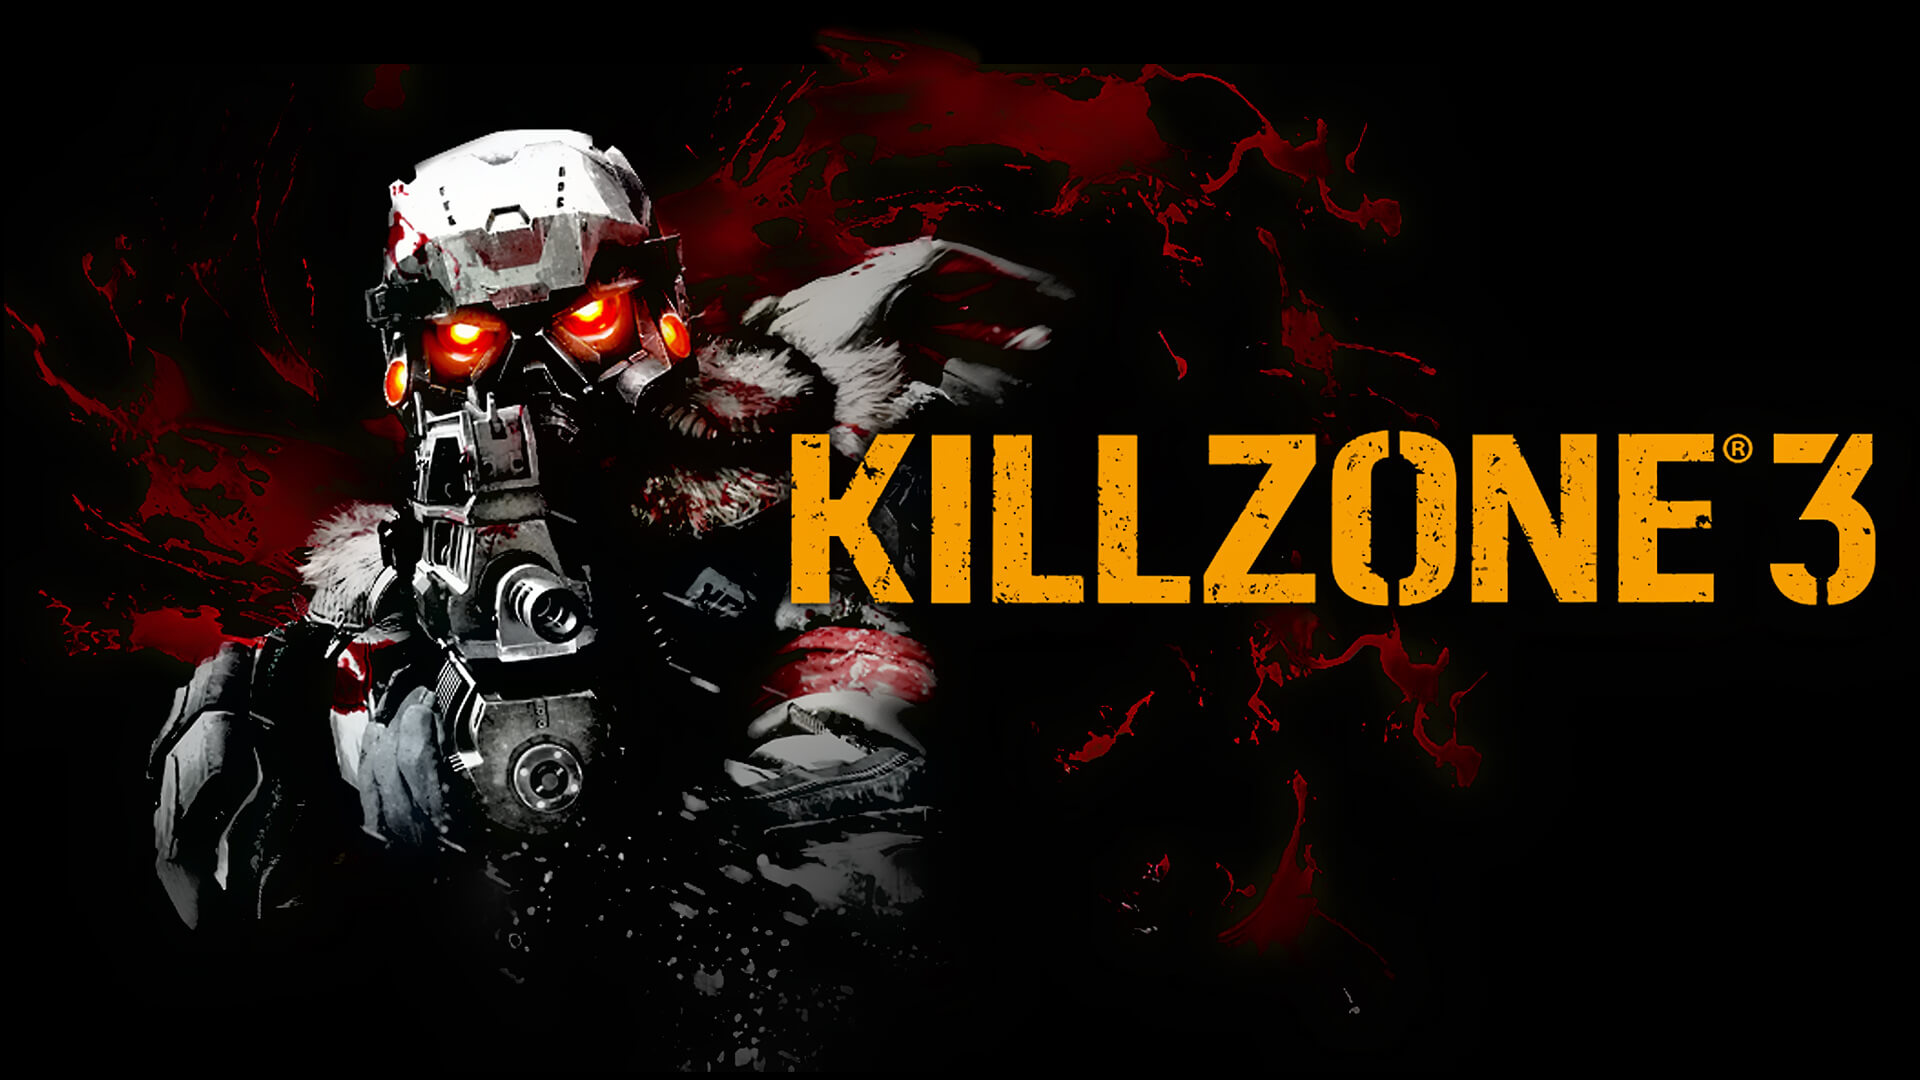 Bloom increase winner Killzone 3 is playable with mouse & keyboard on PC via RPCS3 & KAMI